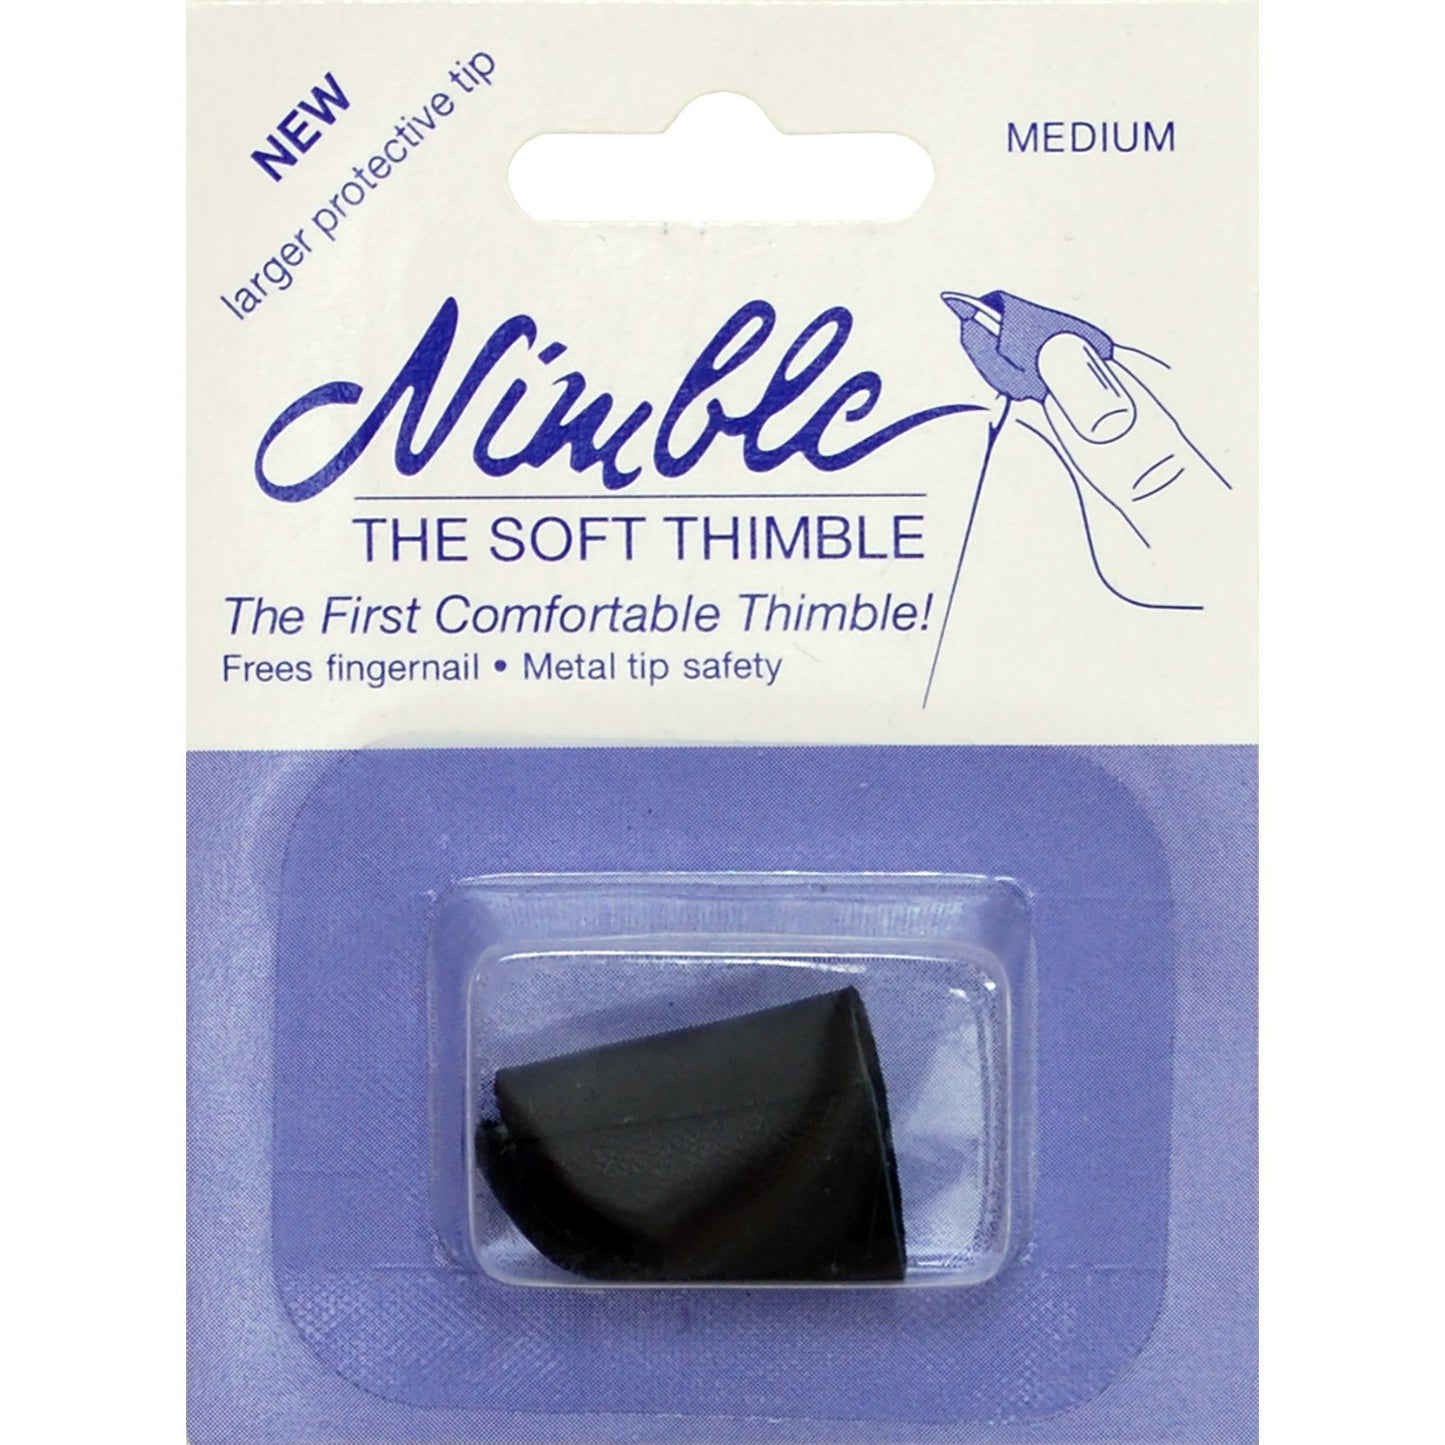 Leather Thimble with open space for fingernail and metal protective tip size Medium.